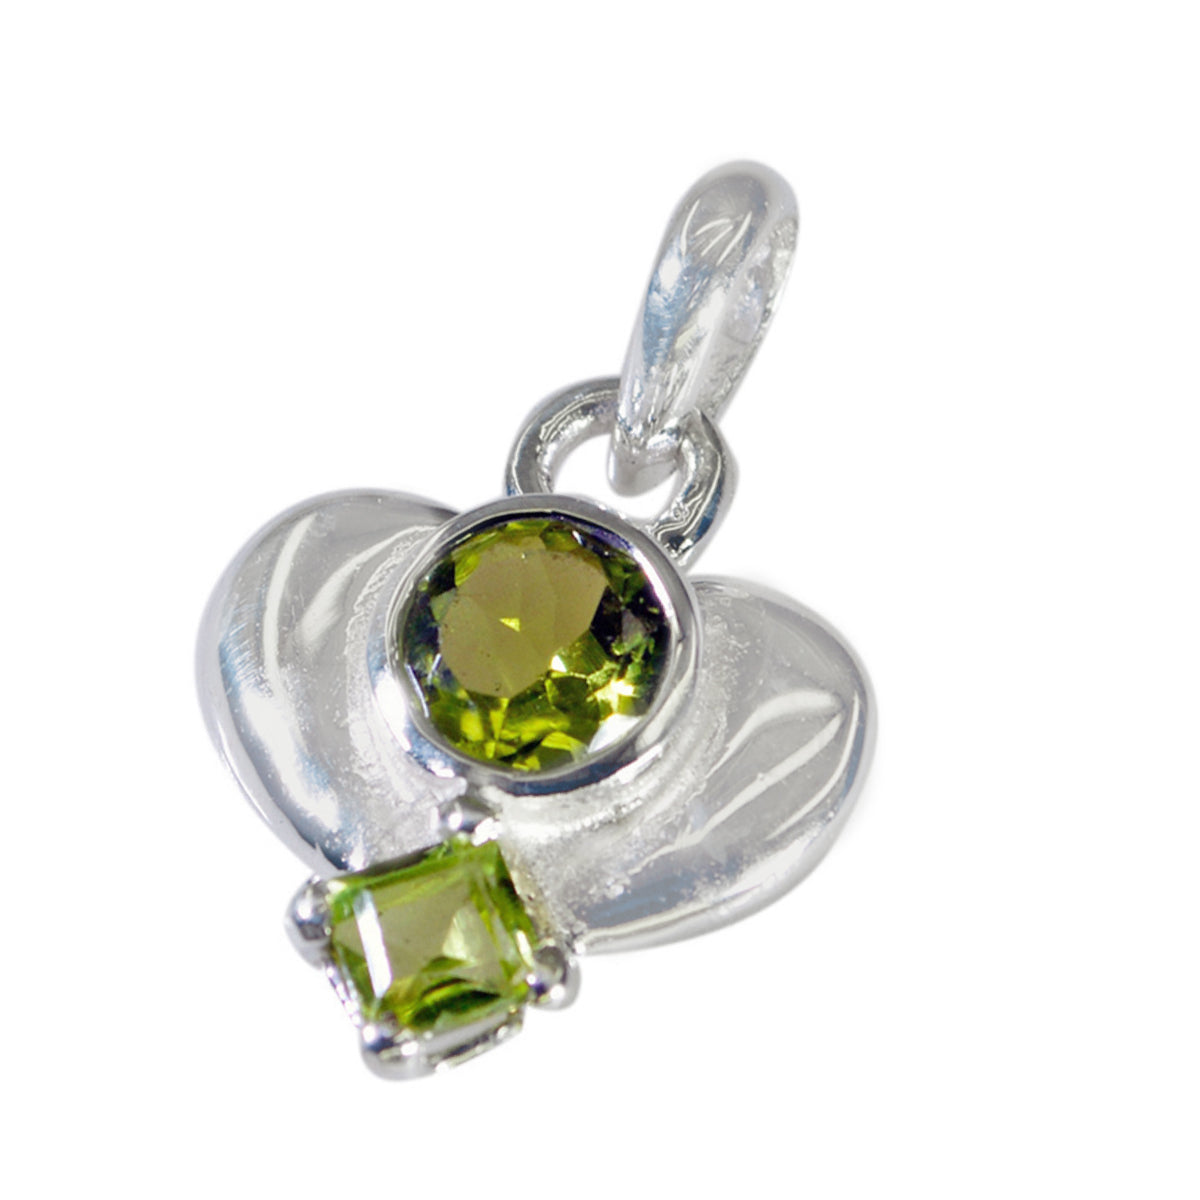 Riyo Beauteous Gems Multi Faceted Green Peridot Solid Silver Pendant Gift For Anniversary